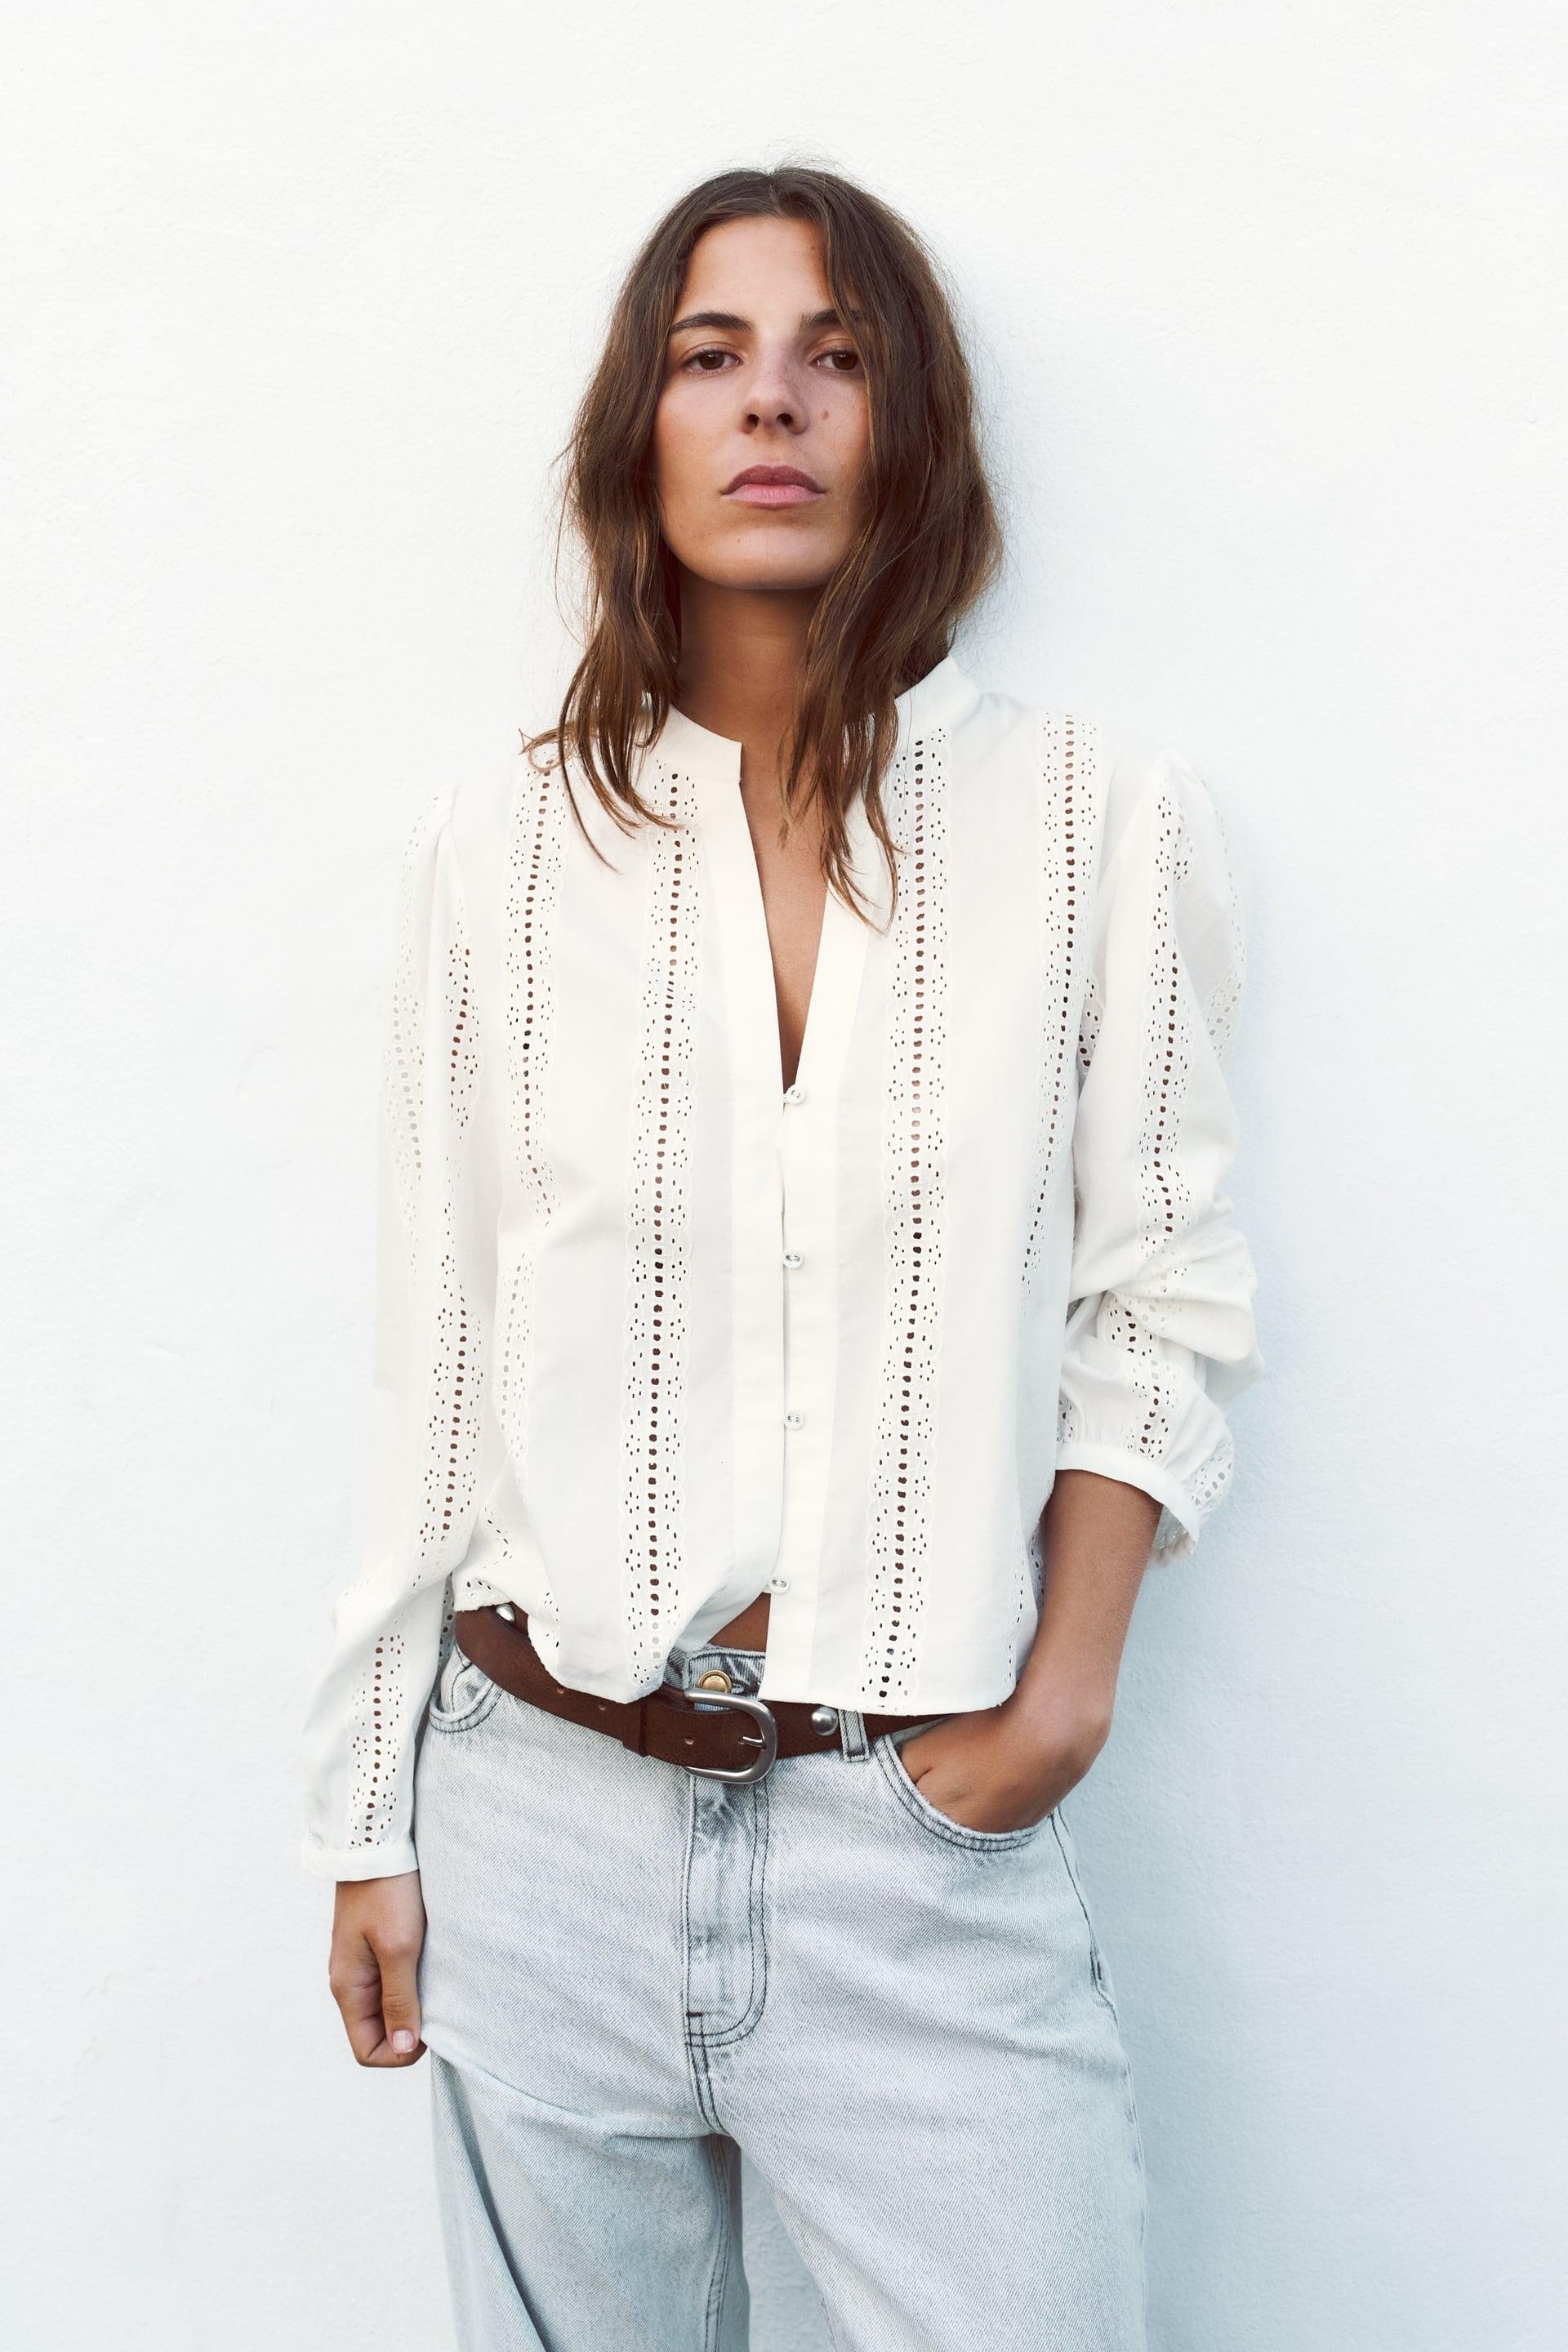 EMBROIDERED EYELET BLOUSE by ZARA